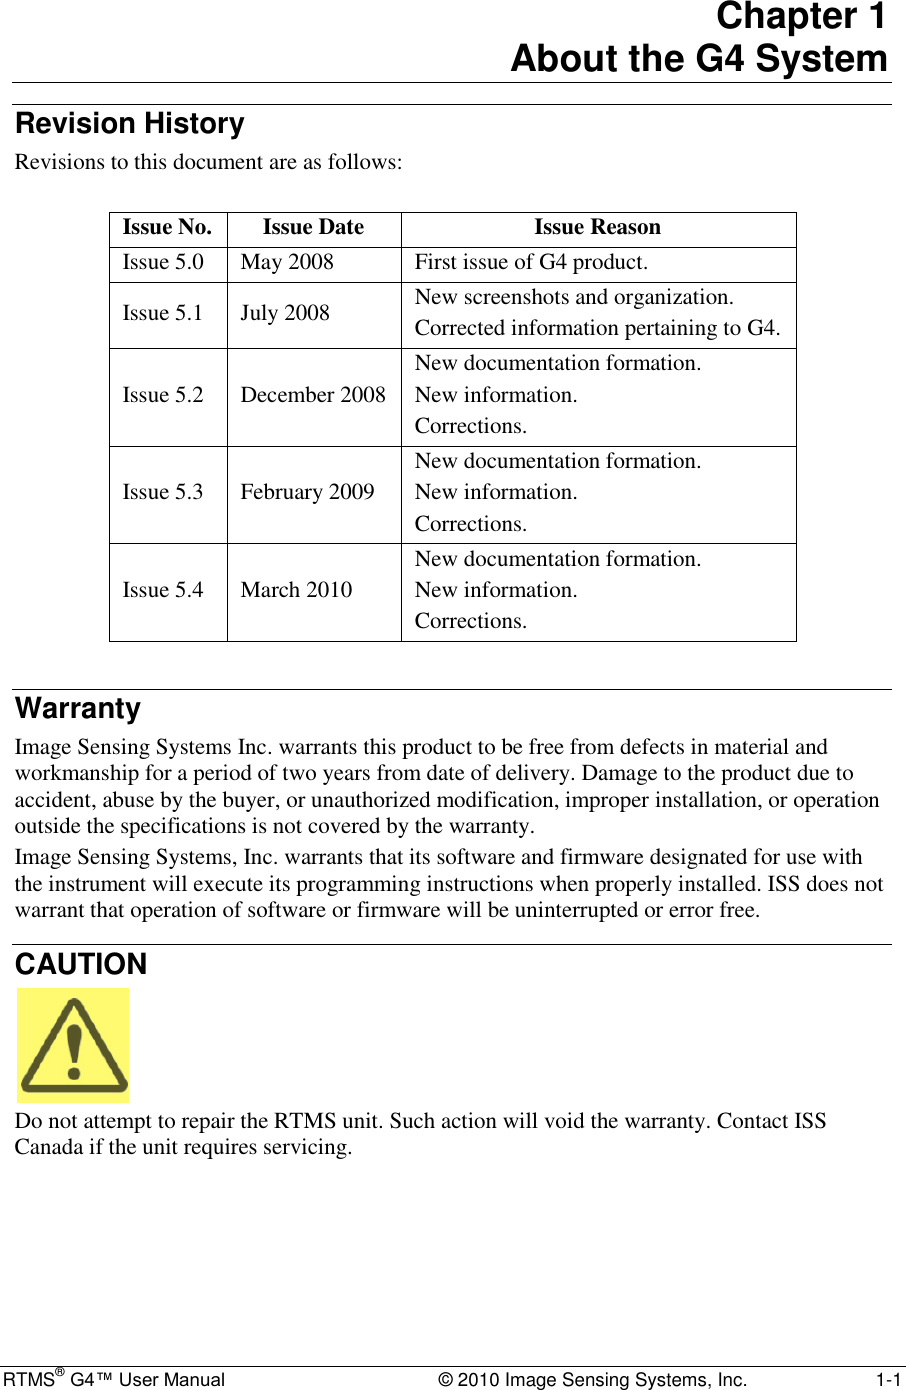  RTMS® G4™ User Manual  © 2010 Image Sensing Systems, Inc.  1-1 Chapter 1 About the G4 System Revision History Revisions to this document are as follows:  Issue No. Issue Date Issue Reason Issue 5.0 May 2008 First issue of G4 product. Issue 5.1 July 2008 New screenshots and organization. Corrected information pertaining to G4. Issue 5.2 December 2008 New documentation formation. New information. Corrections. Issue 5.3 February 2009 New documentation formation. New information. Corrections. Issue 5.4 March 2010 New documentation formation. New information. Corrections.  Warranty Image Sensing Systems Inc. warrants this product to be free from defects in material and workmanship for a period of two years from date of delivery. Damage to the product due to accident, abuse by the buyer, or unauthorized modification, improper installation, or operation outside the specifications is not covered by the warranty. Image Sensing Systems, Inc. warrants that its software and firmware designated for use with the instrument will execute its programming instructions when properly installed. ISS does not warrant that operation of software or firmware will be uninterrupted or error free. CAUTION  Do not attempt to repair the RTMS unit. Such action will void the warranty. Contact ISS Canada if the unit requires servicing.  